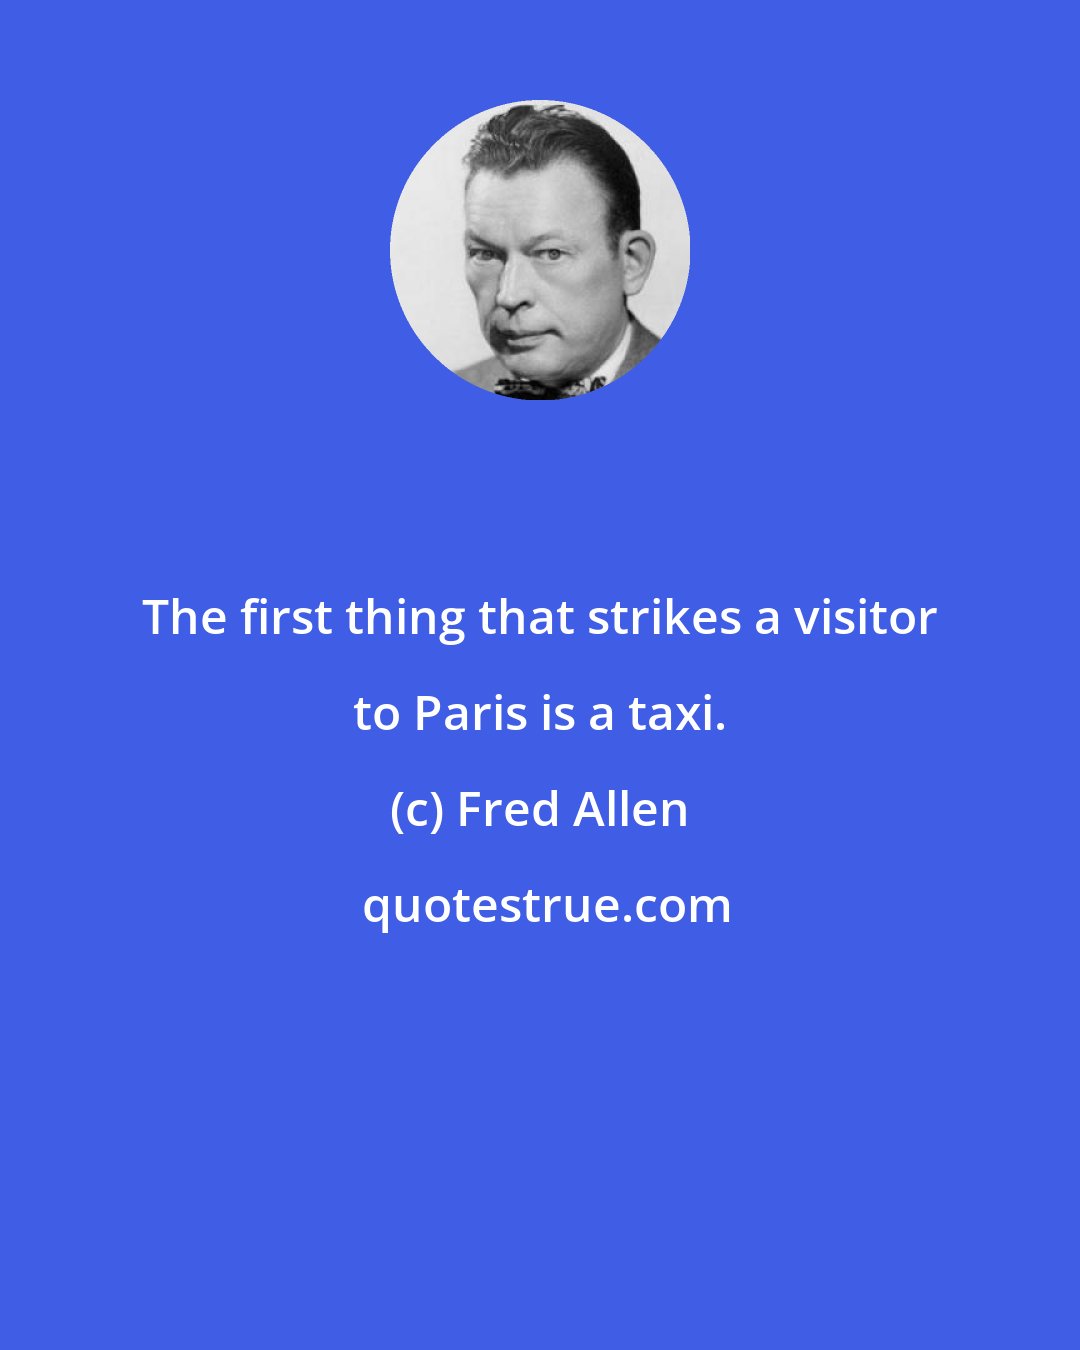 Fred Allen: The first thing that strikes a visitor to Paris is a taxi.